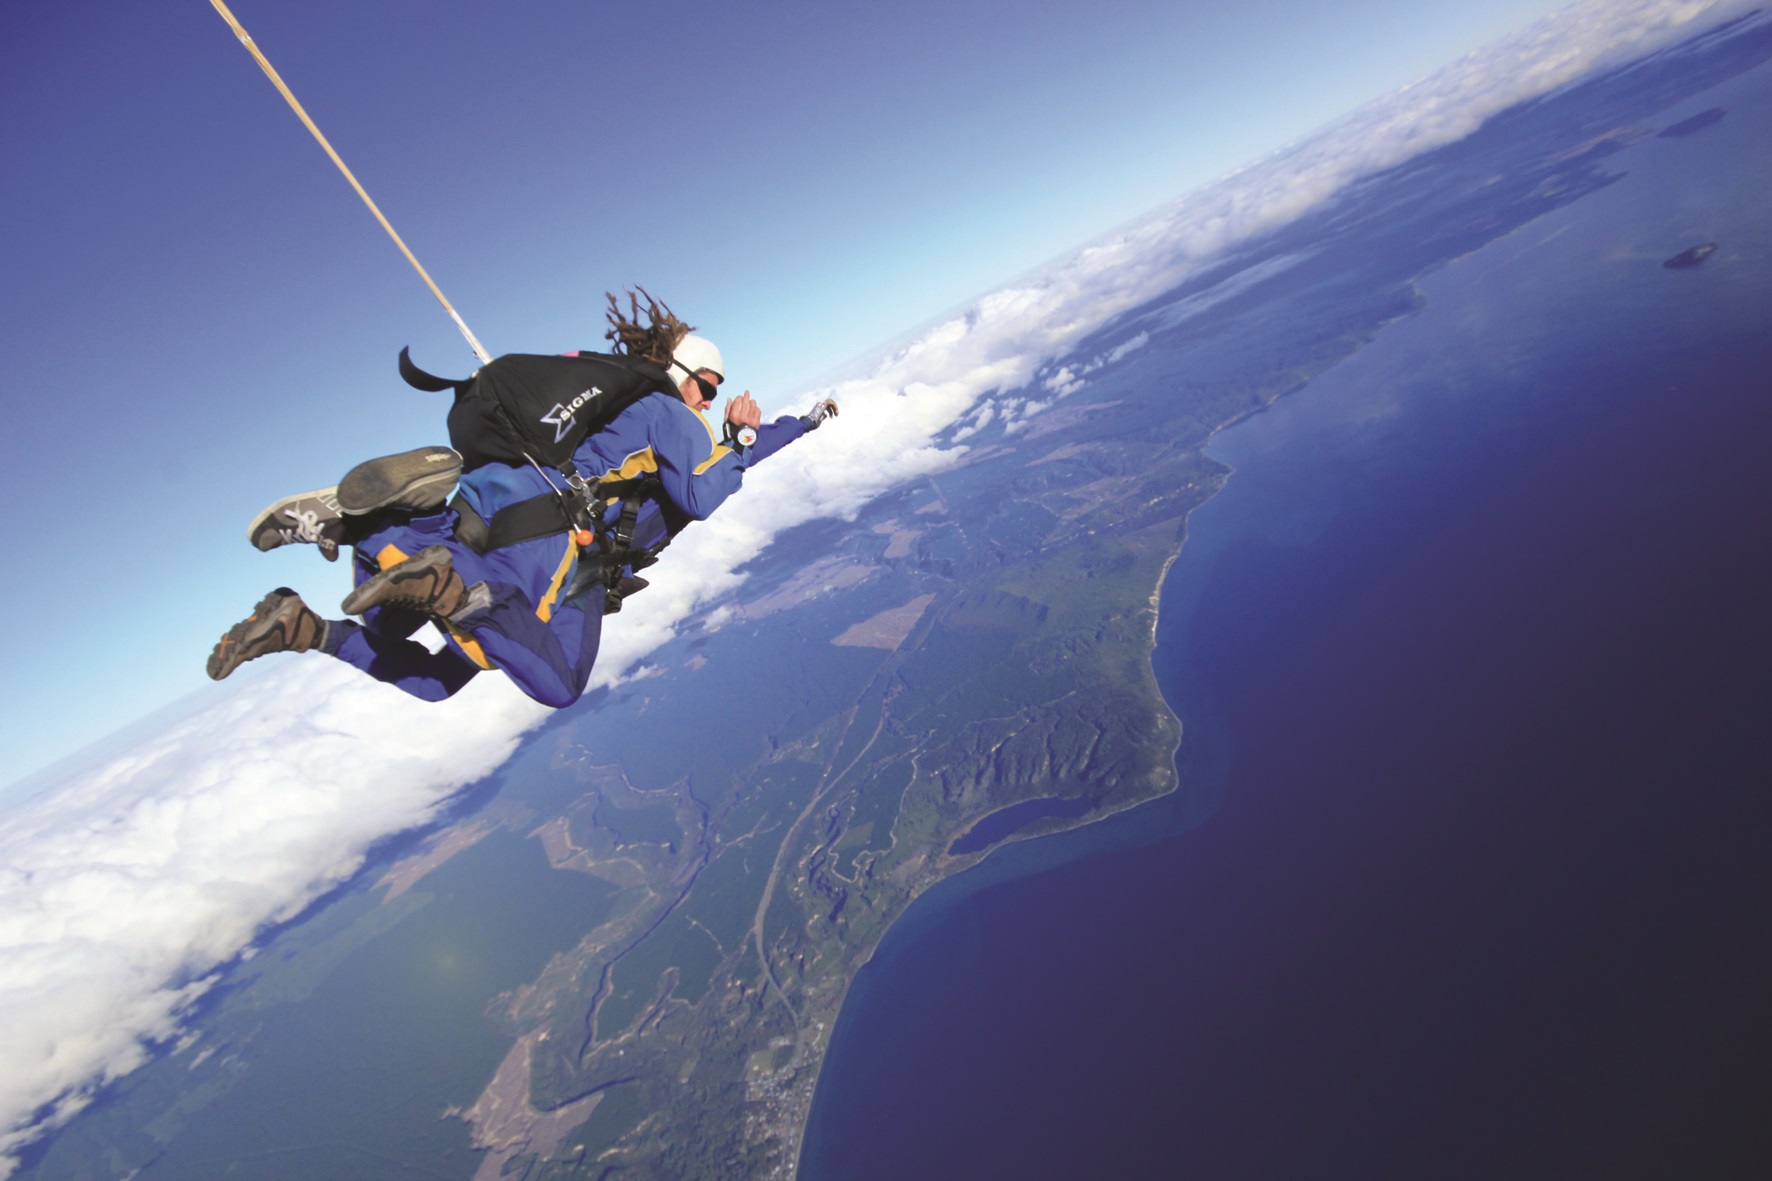 explore NZ Tandem free fall sky diving with 15,000 feet at Lake Taupo